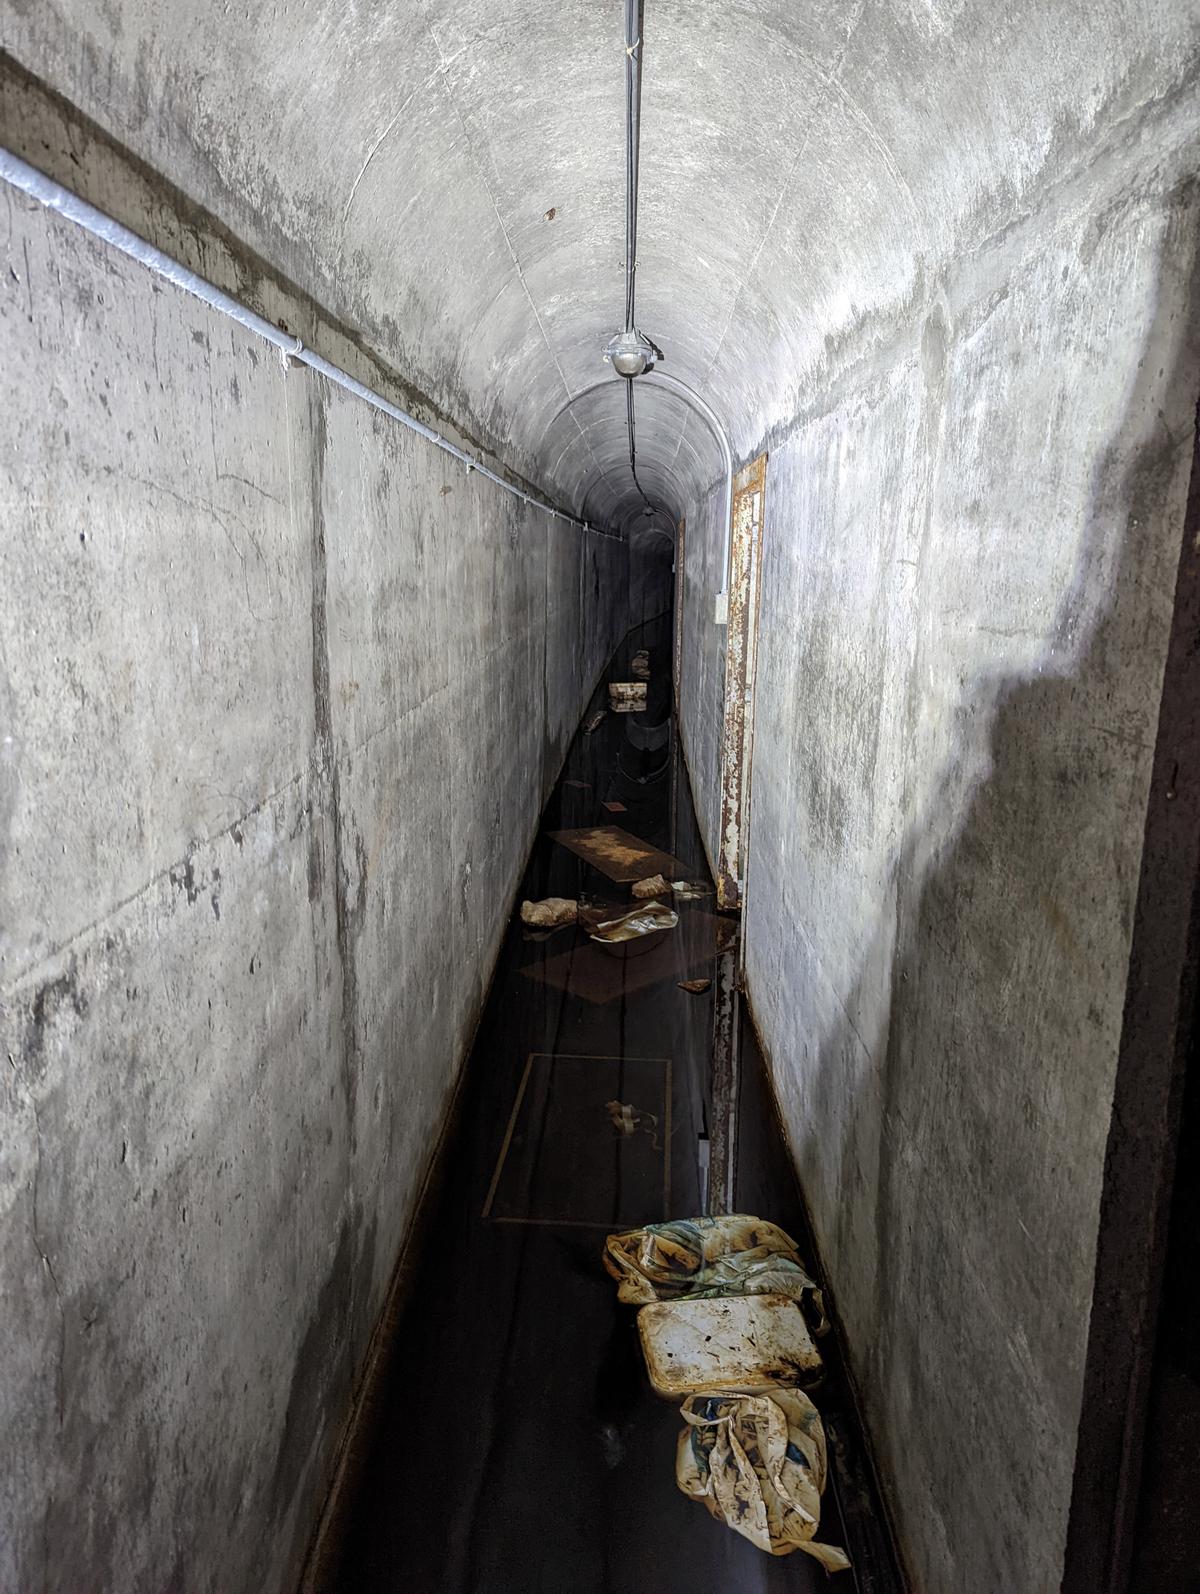 A passage inside the abandoned WWII archive store. (Courtesy of Caters News)